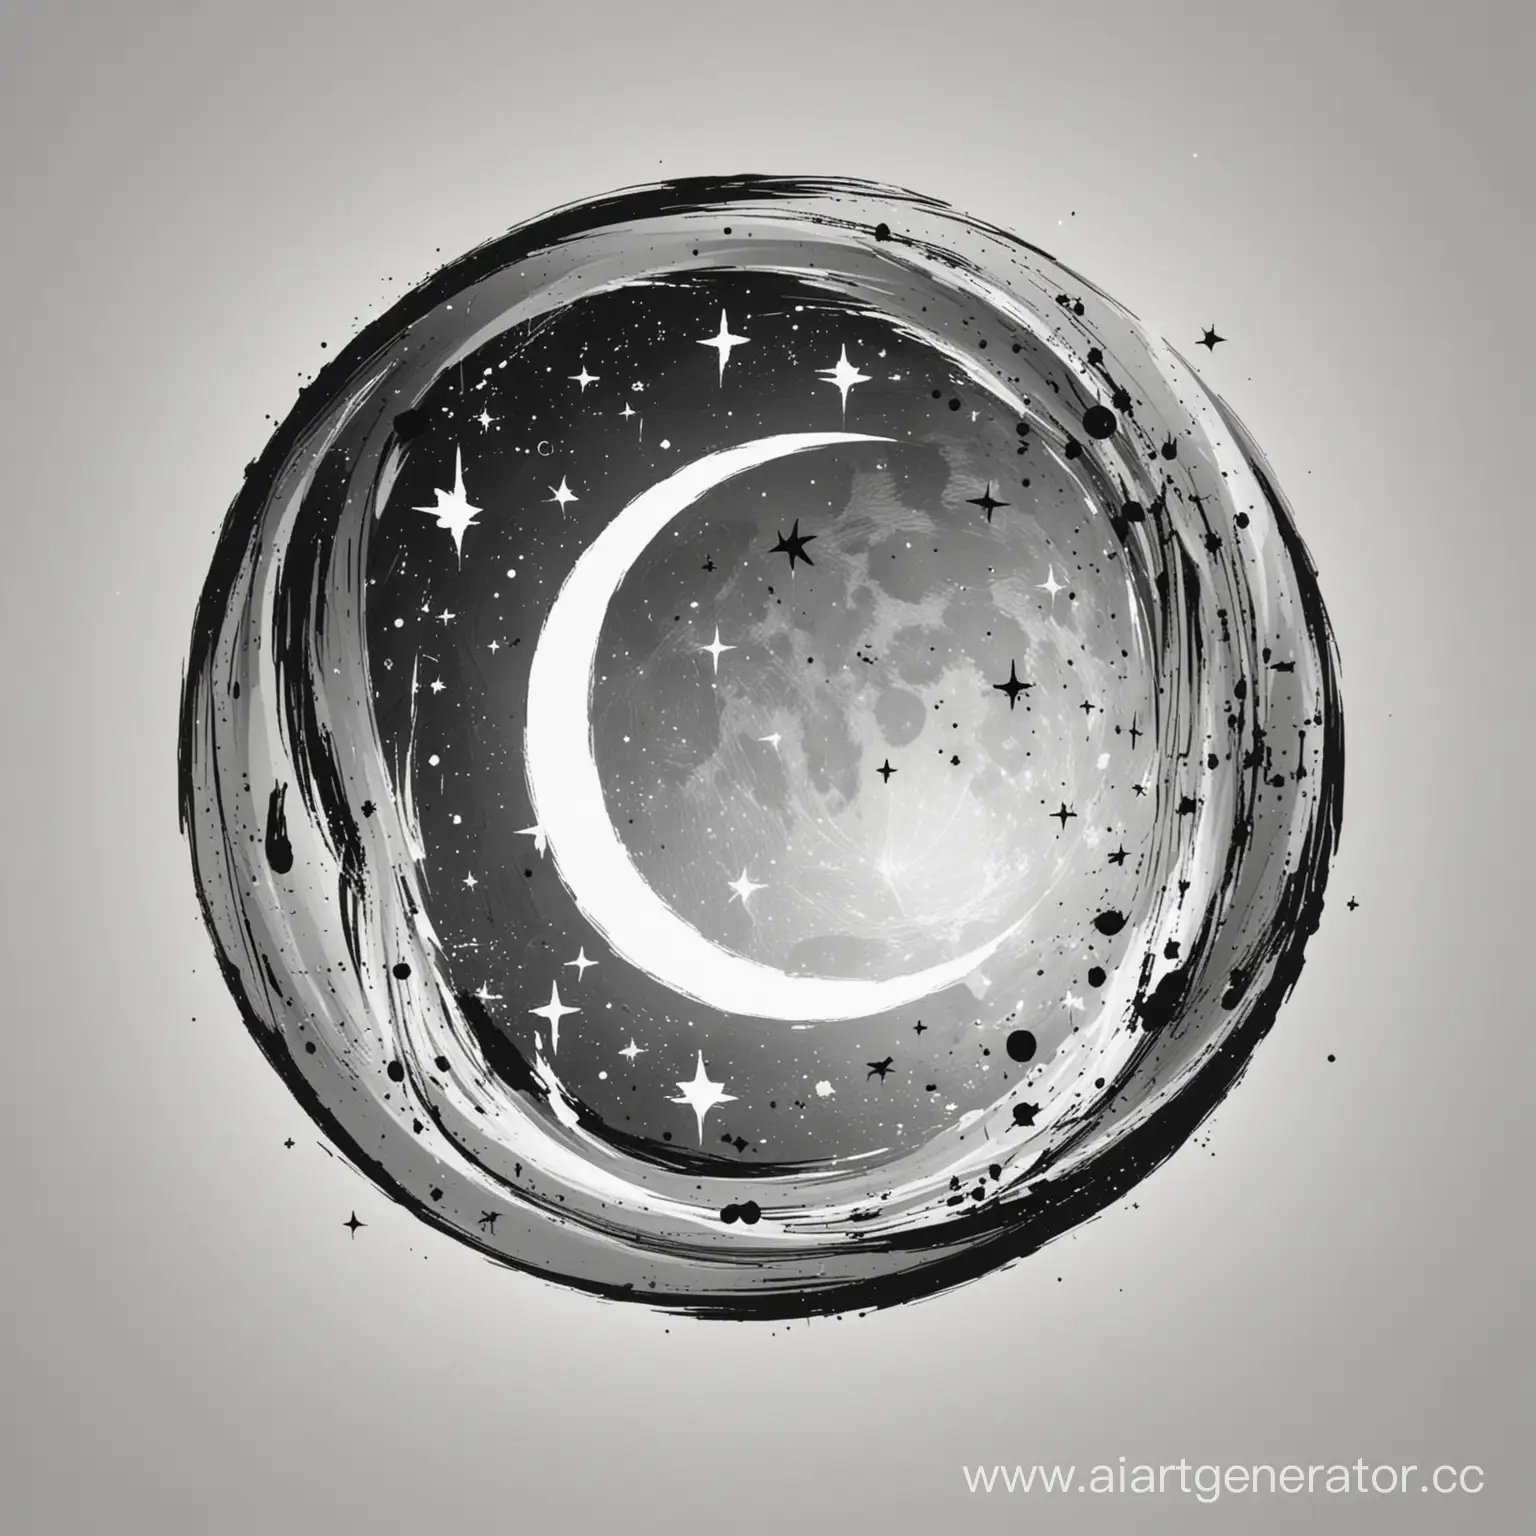 moon, abstract forms, minimalistic concise logo, black and white, full size, stars around, drawing details